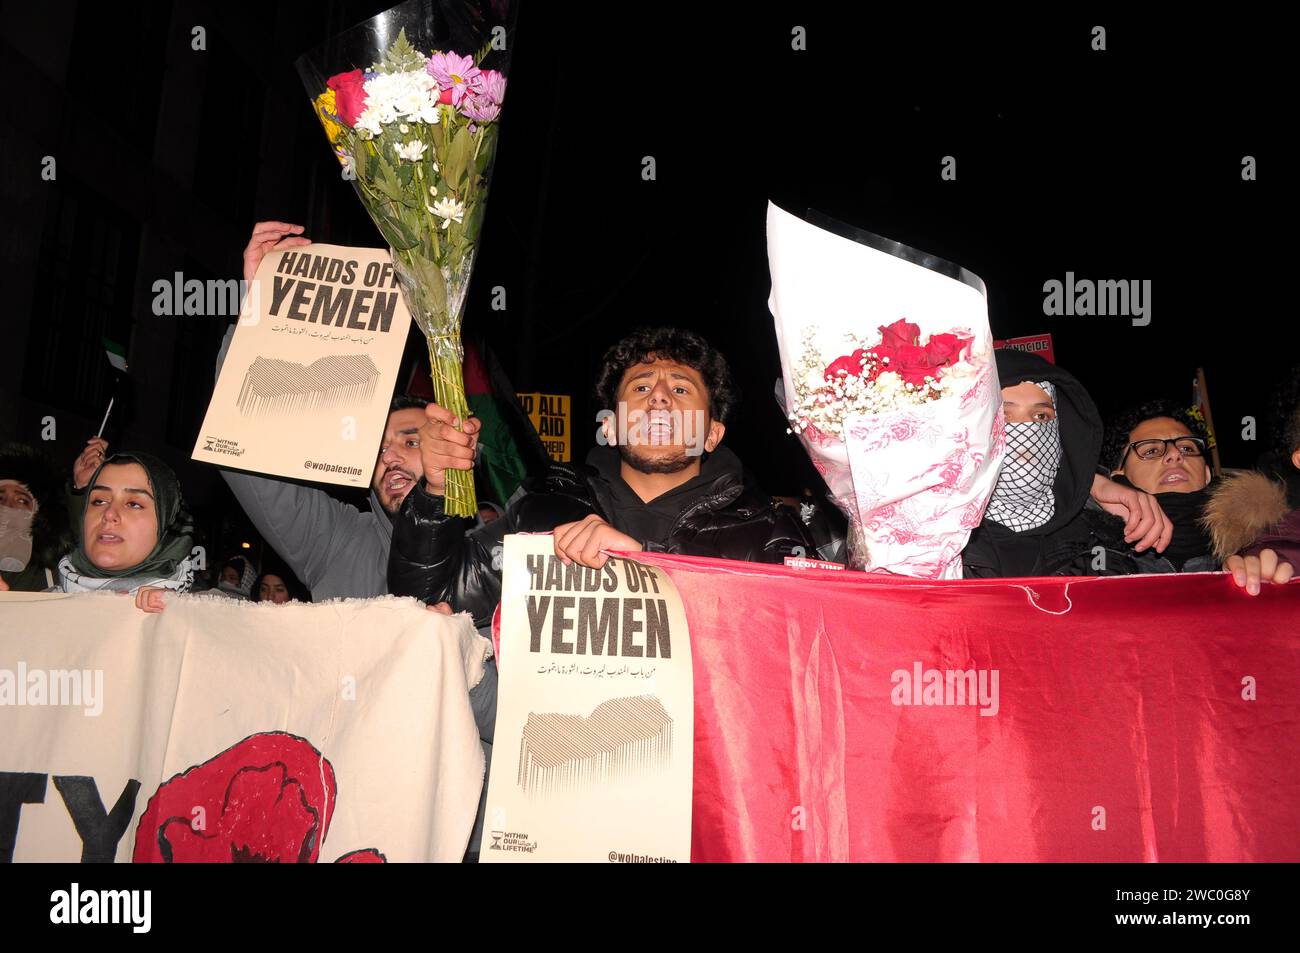 Protestors carry flower bouquets, banners, hold the Yemeni flag and display placards at a rally supporting Yemen and Palestine. Hundreds of demonstrators marched in Manhattan, New York City to condemn the U.S. and U.K. militaries who launched airstrikes on Thursday, January 11 against Houthi targets in Yemen. Demonstrators also demanded a permanent ceasefire in the war between Israel and Hamas, and an end to the Israeli military's bombardment of Gaza. According to U.S. President Joe Biden, the January 11 airstrikes in Yemen 'are in direct response to unprecedented Houthi attacks against intern Stock Photo